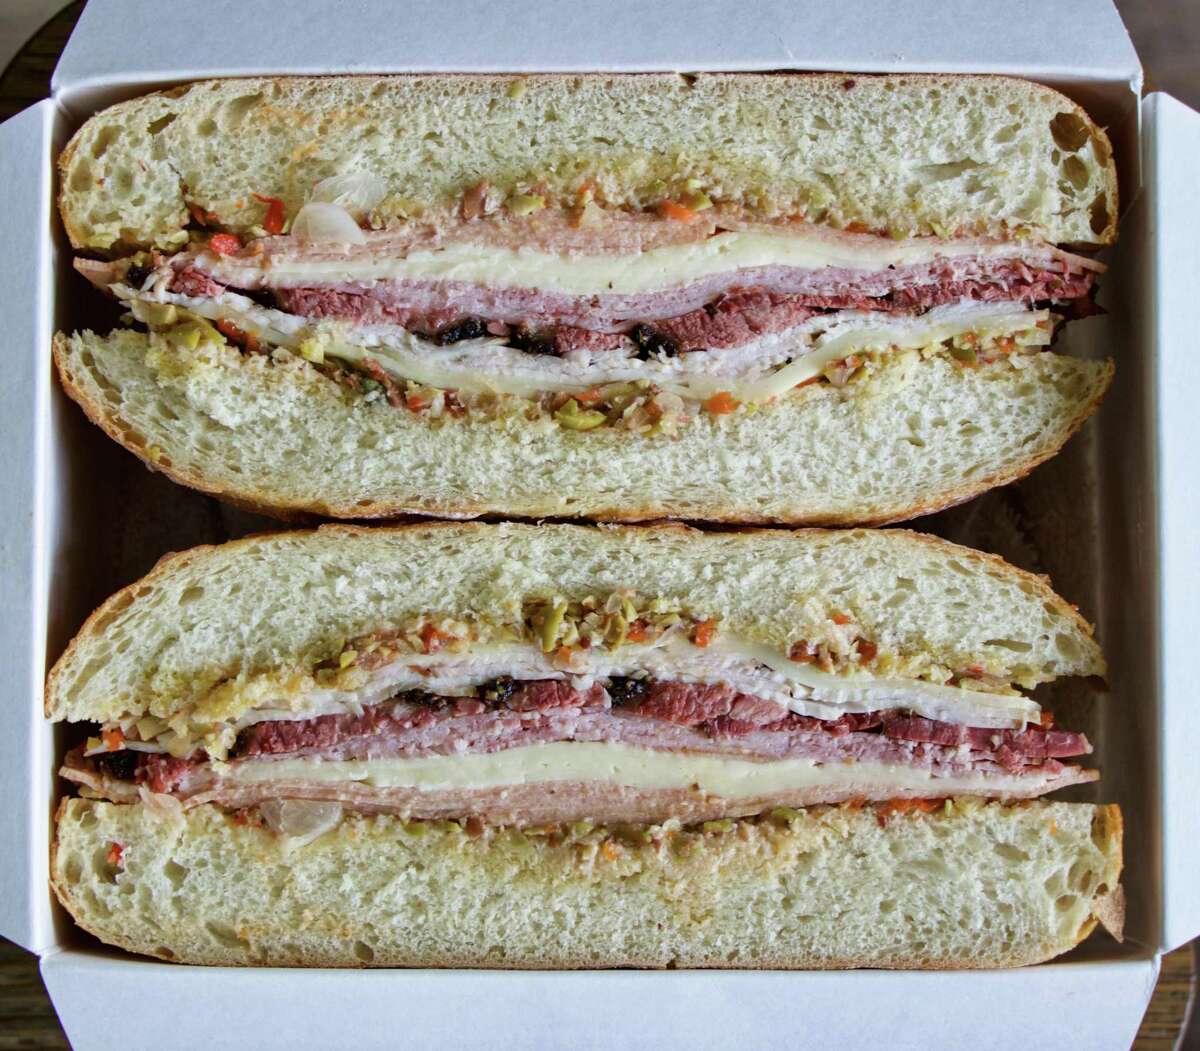 Brett's Barbecue Shop in Katy has created its own Texas Smoked Muffuletta made with house-smoked meats (pastrami, turkey breast, bologna and ham), Havarti and Provolone cheeses and hot giardiniera/olive/red pepper salad on an Italian round loaf.